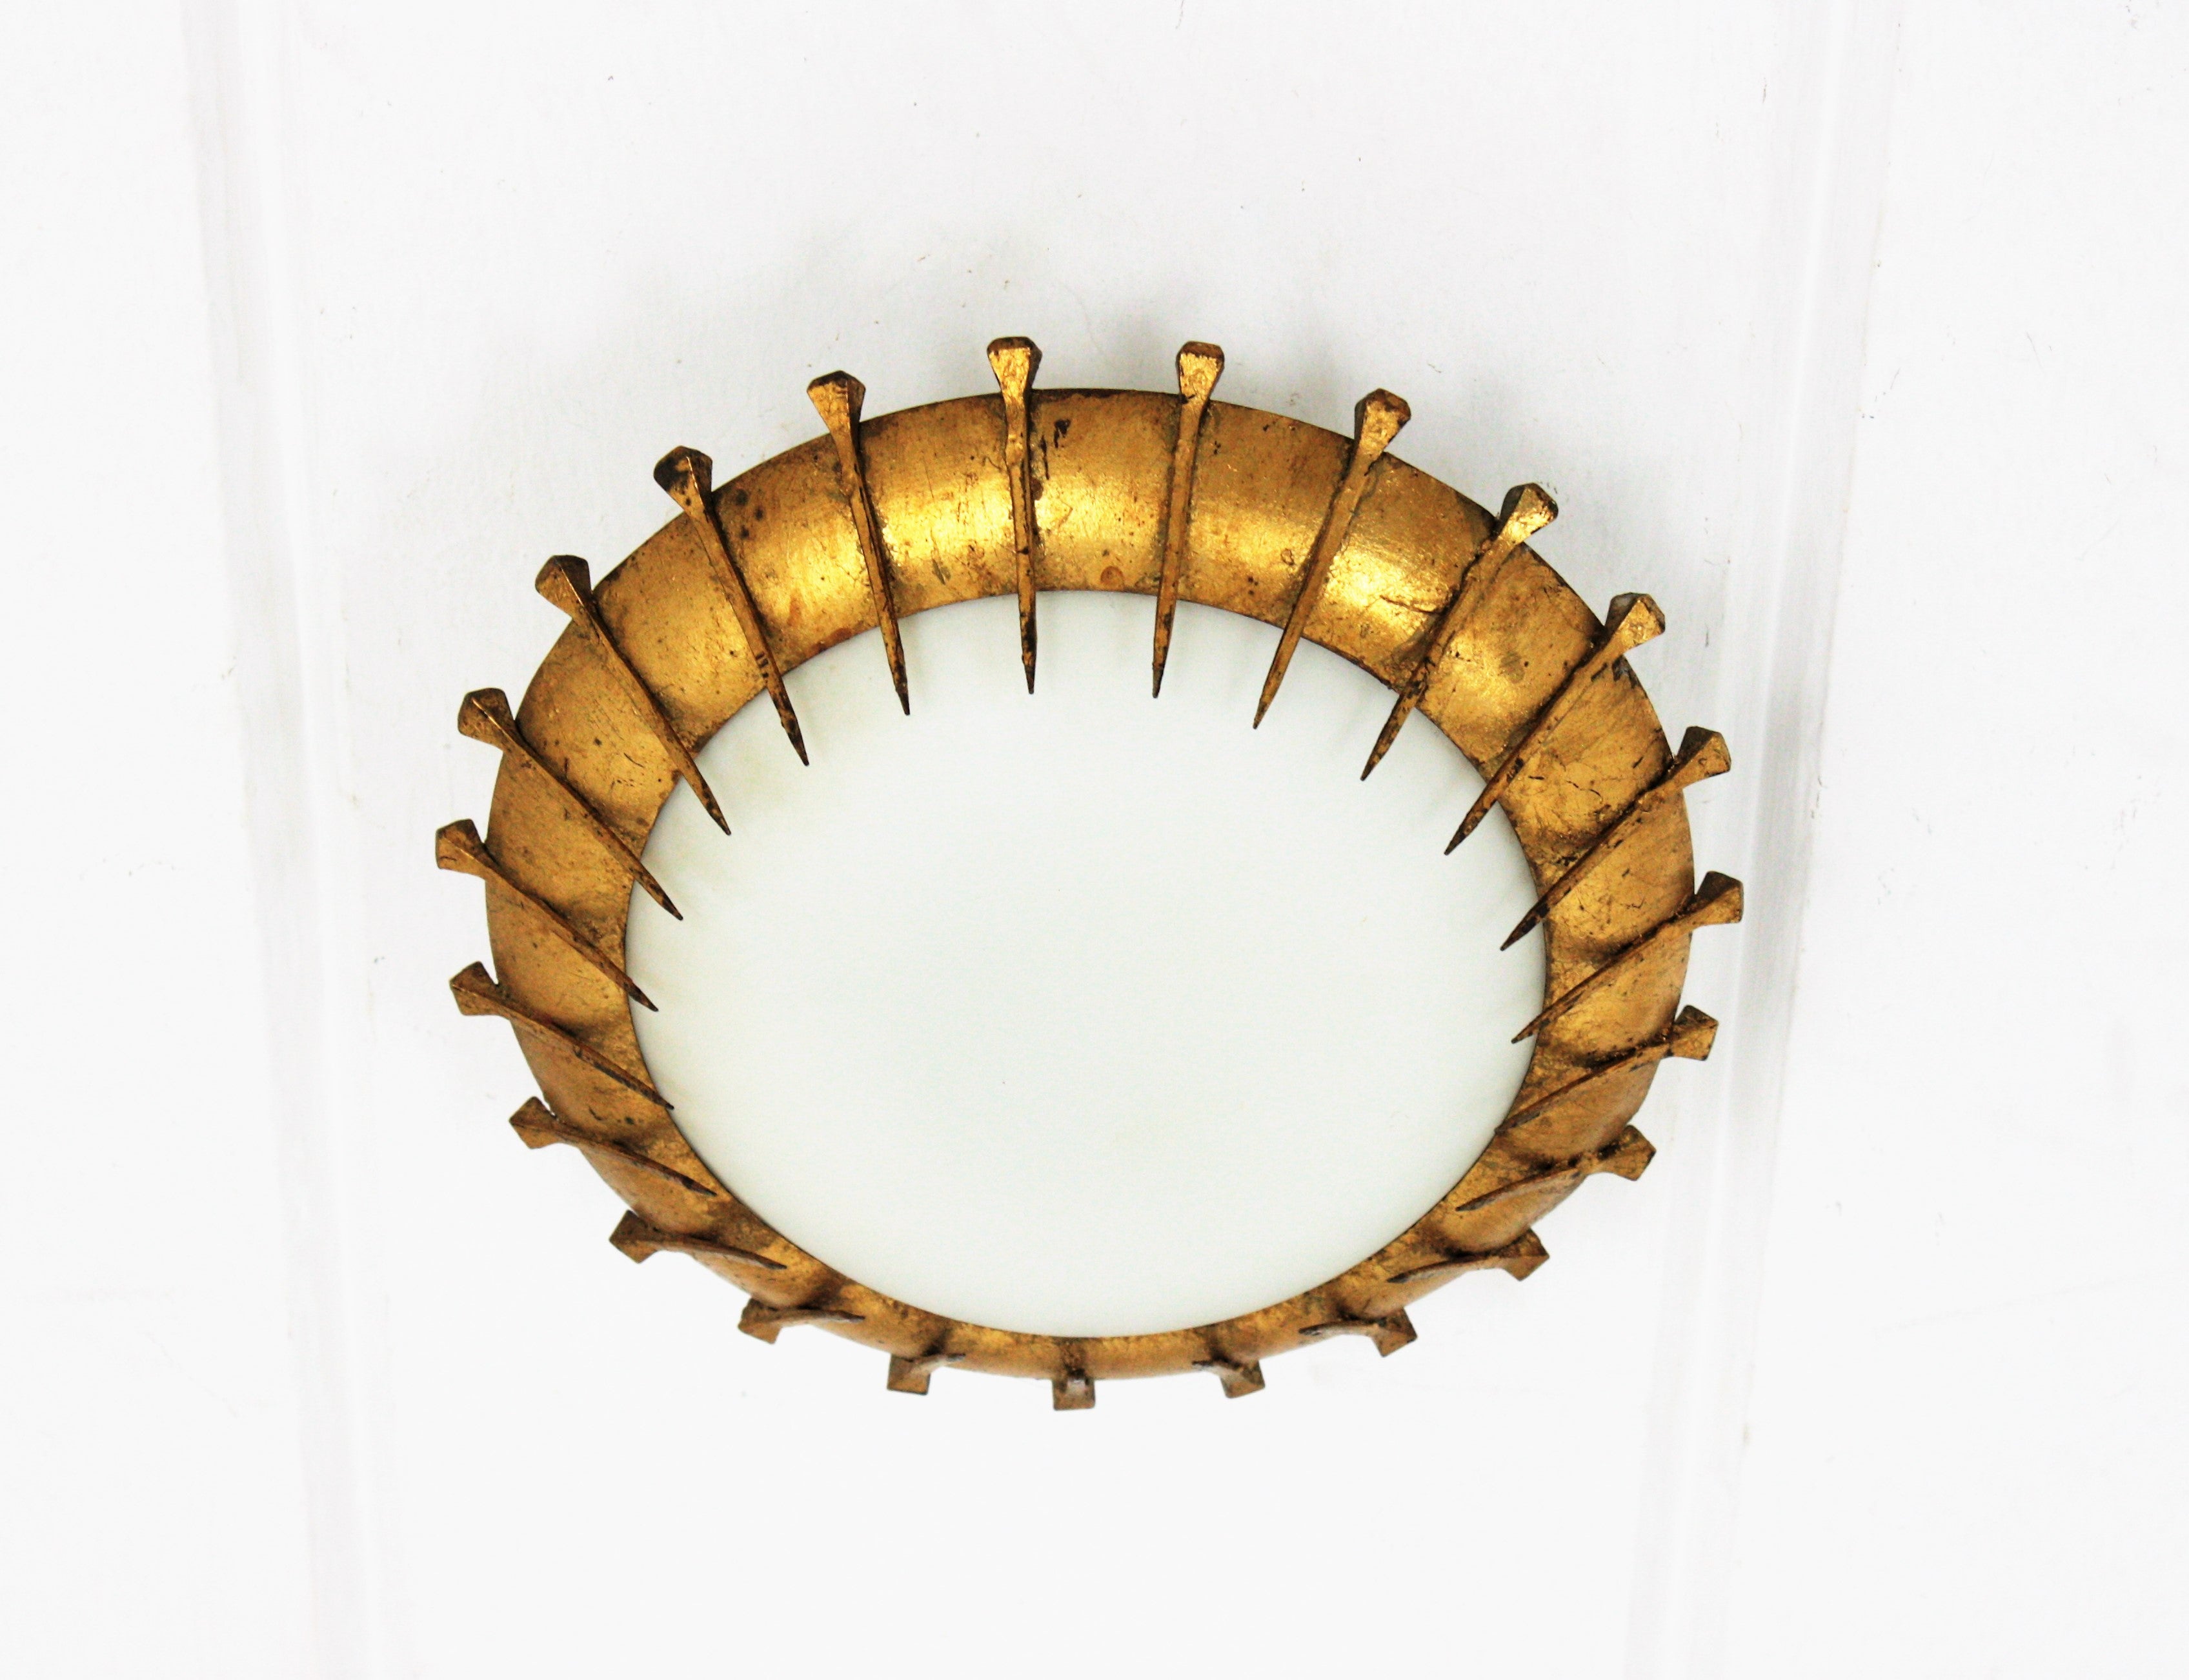 Nail Design sunburst flush mount, gilt wrought iron, milk glass, France, 1940s-1950s.
Hand-hammered iron and opaline glass sunburst flush mount with nails decoration and gold leaf finish. 
Beautiful to place it alone but also interesting mixed